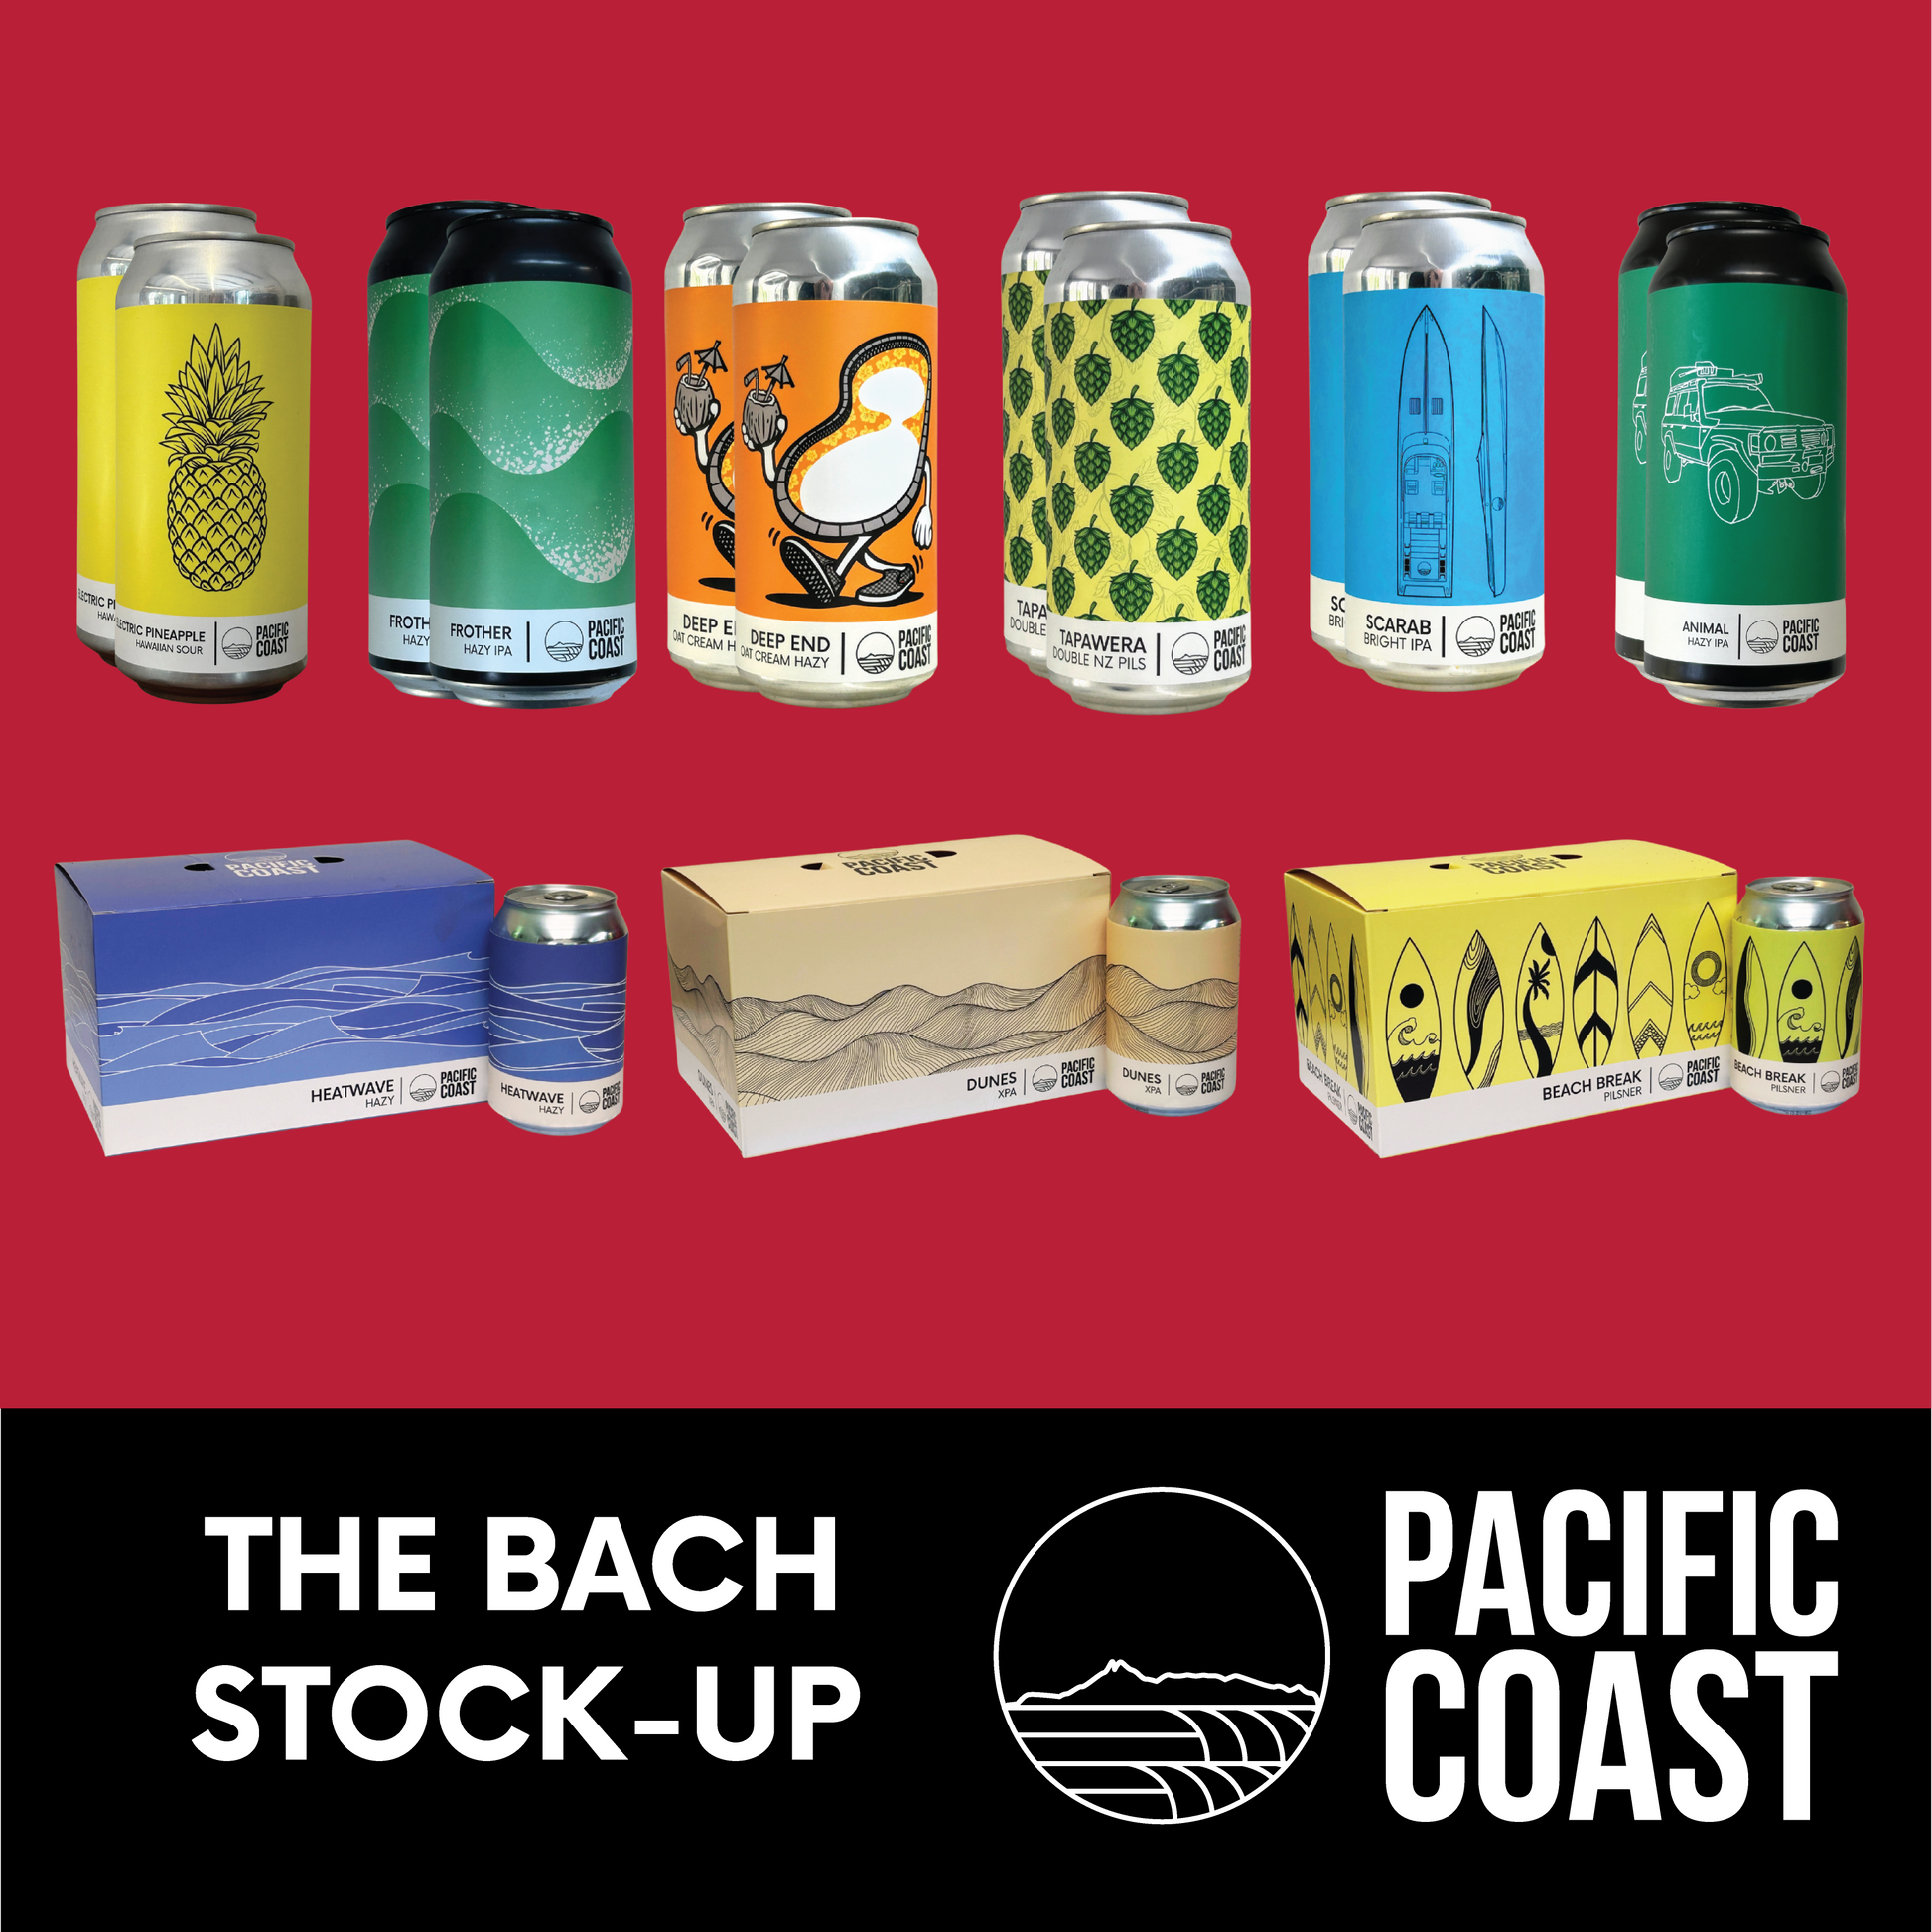 A bundle of Beer from Pacific Coast Brewery